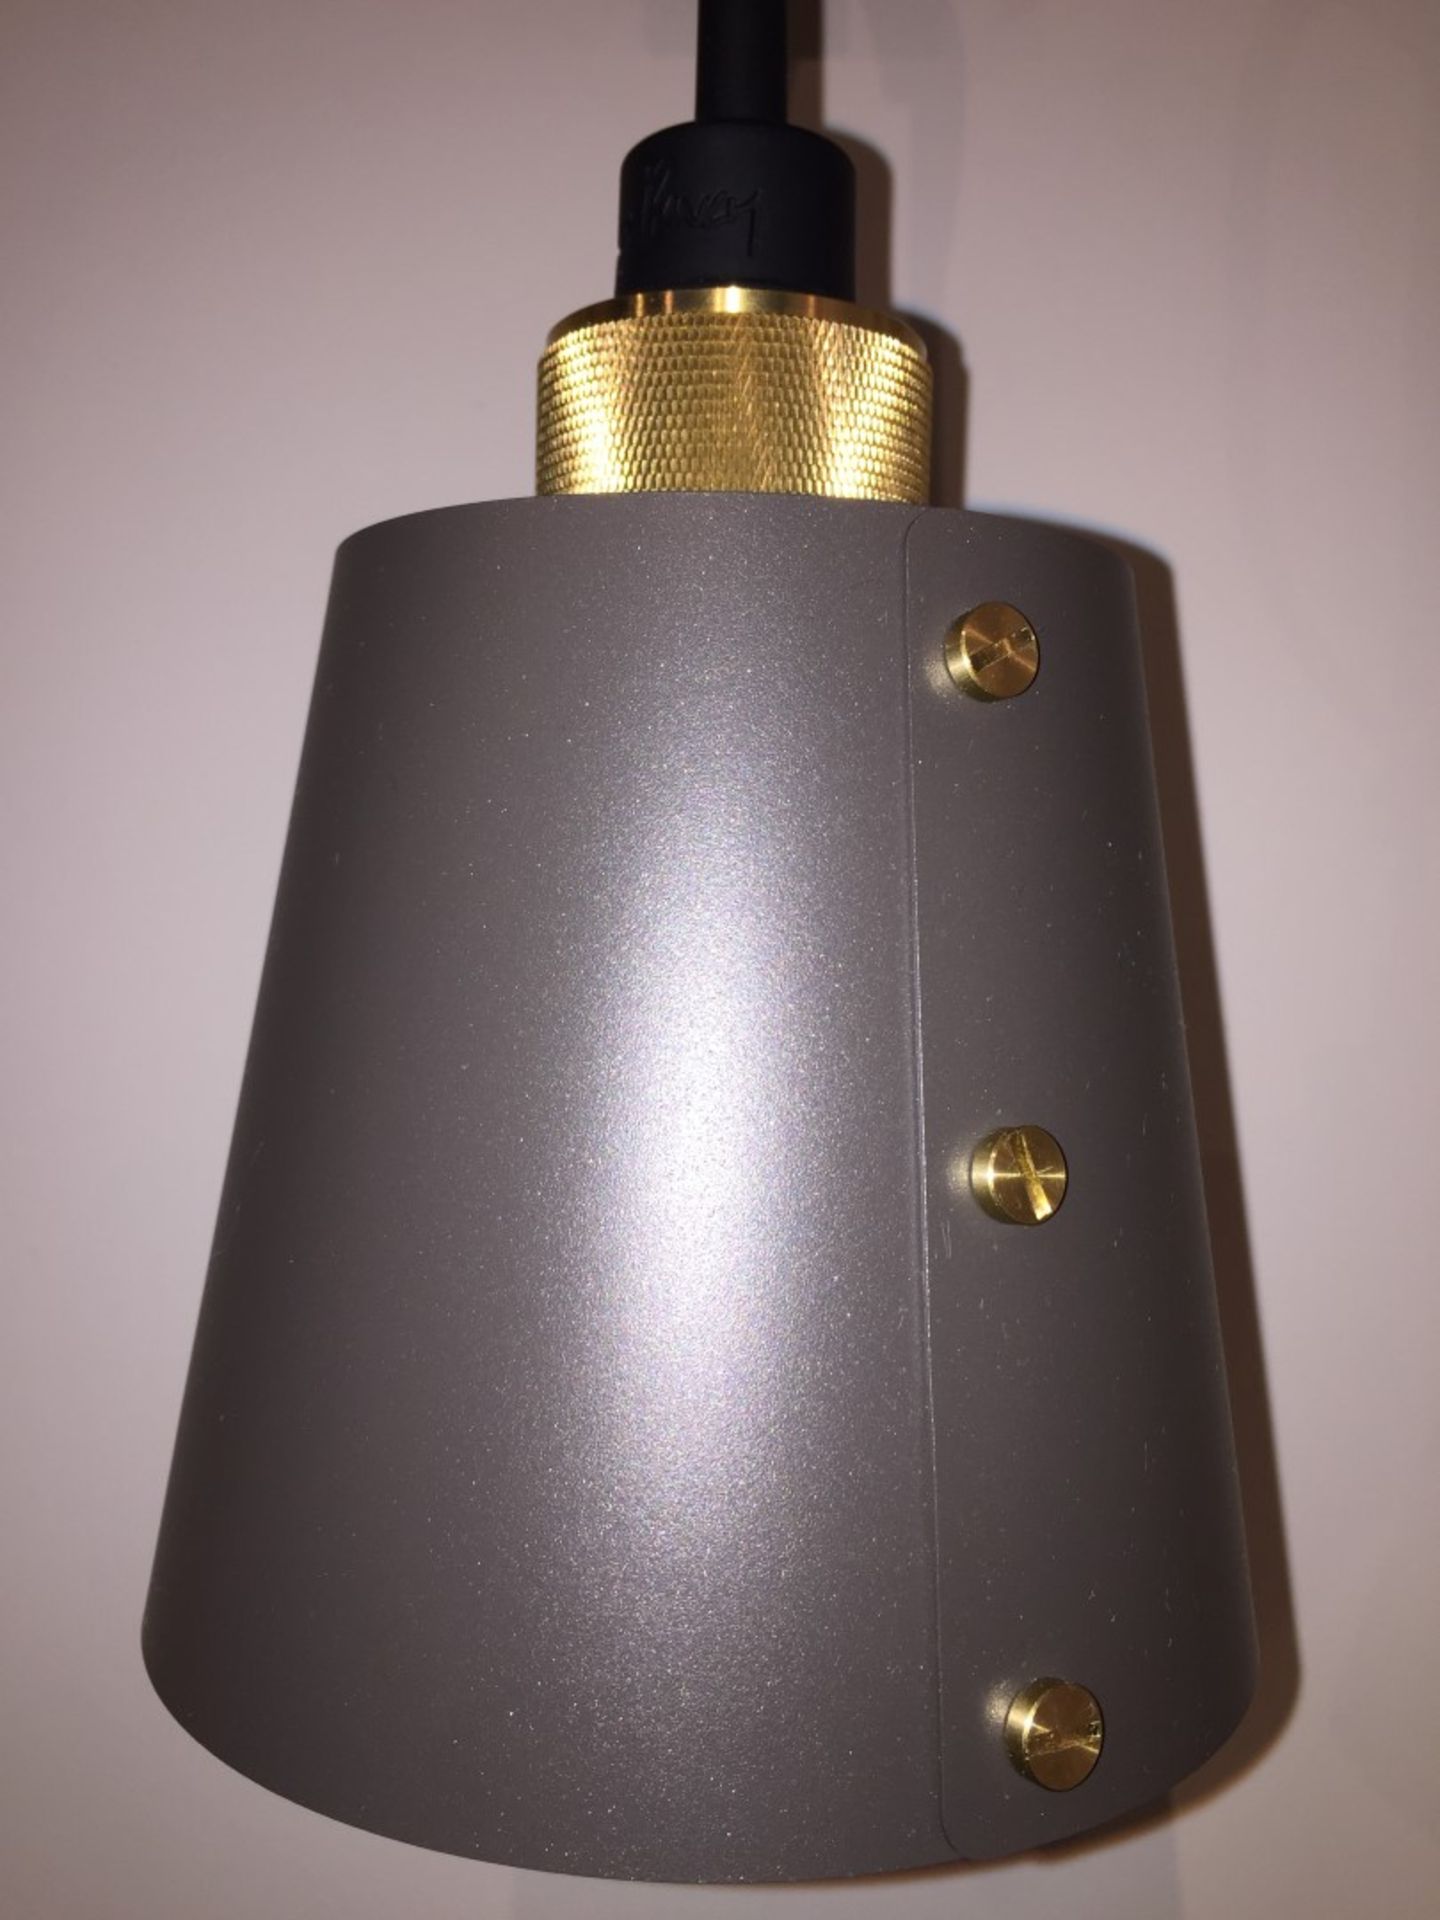 1 x BUSTER + PUNCH Hooked Wall Light With Metal Shade - Ref: WS/FF160G - CL204 - Location: London Ci - Image 5 of 10